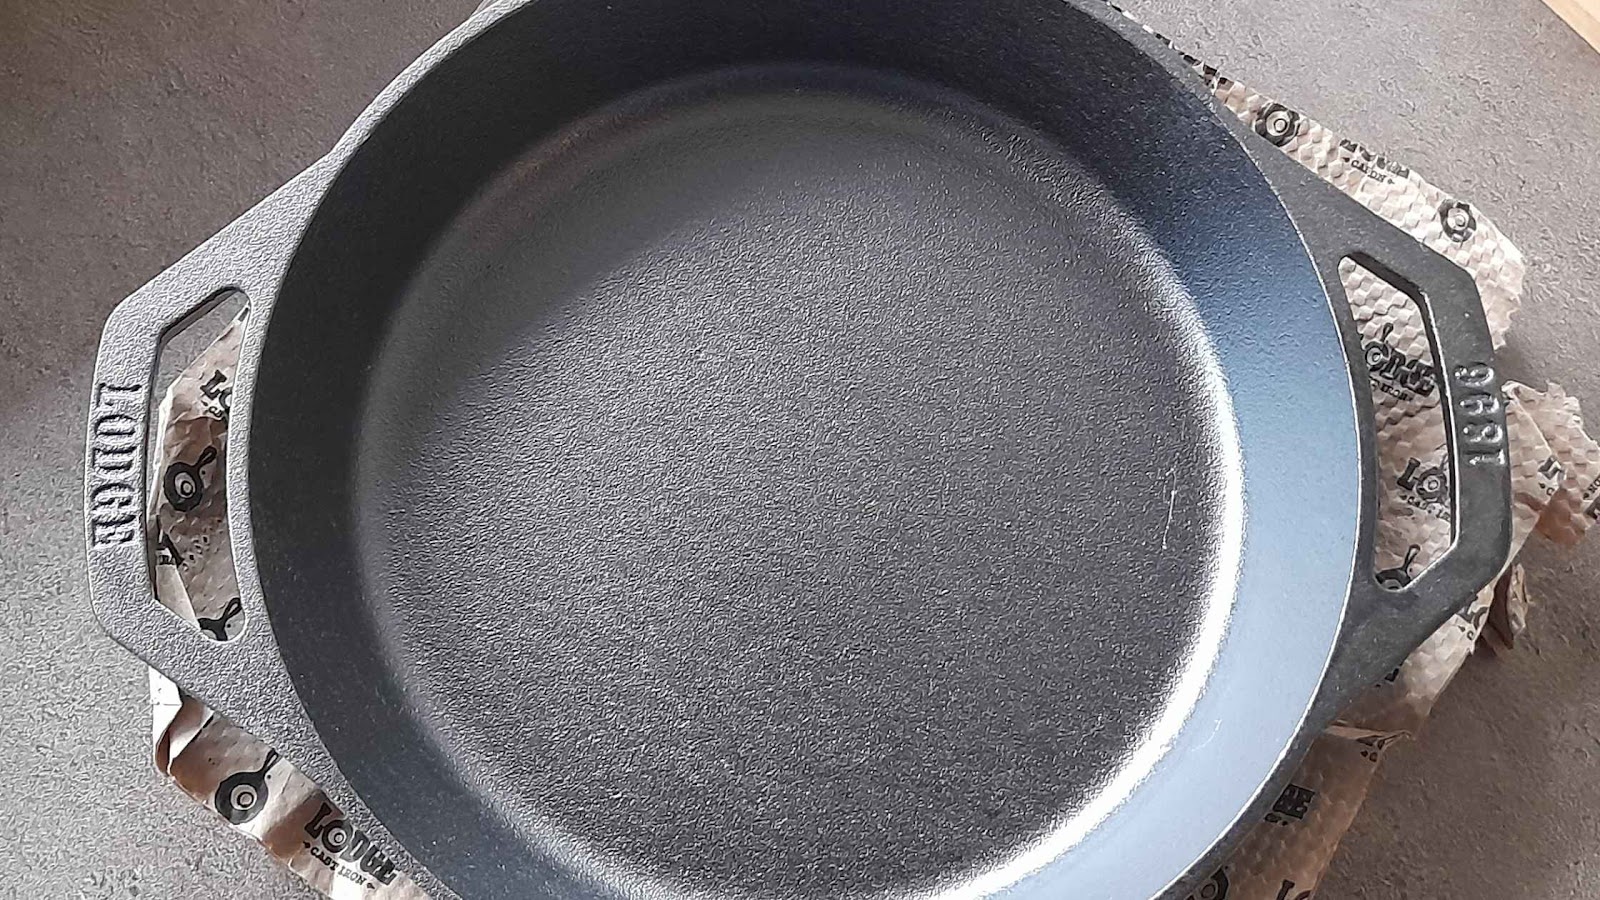 Base of the Lodge Cast Iron Dual Handle Pan—marketing materials removed.